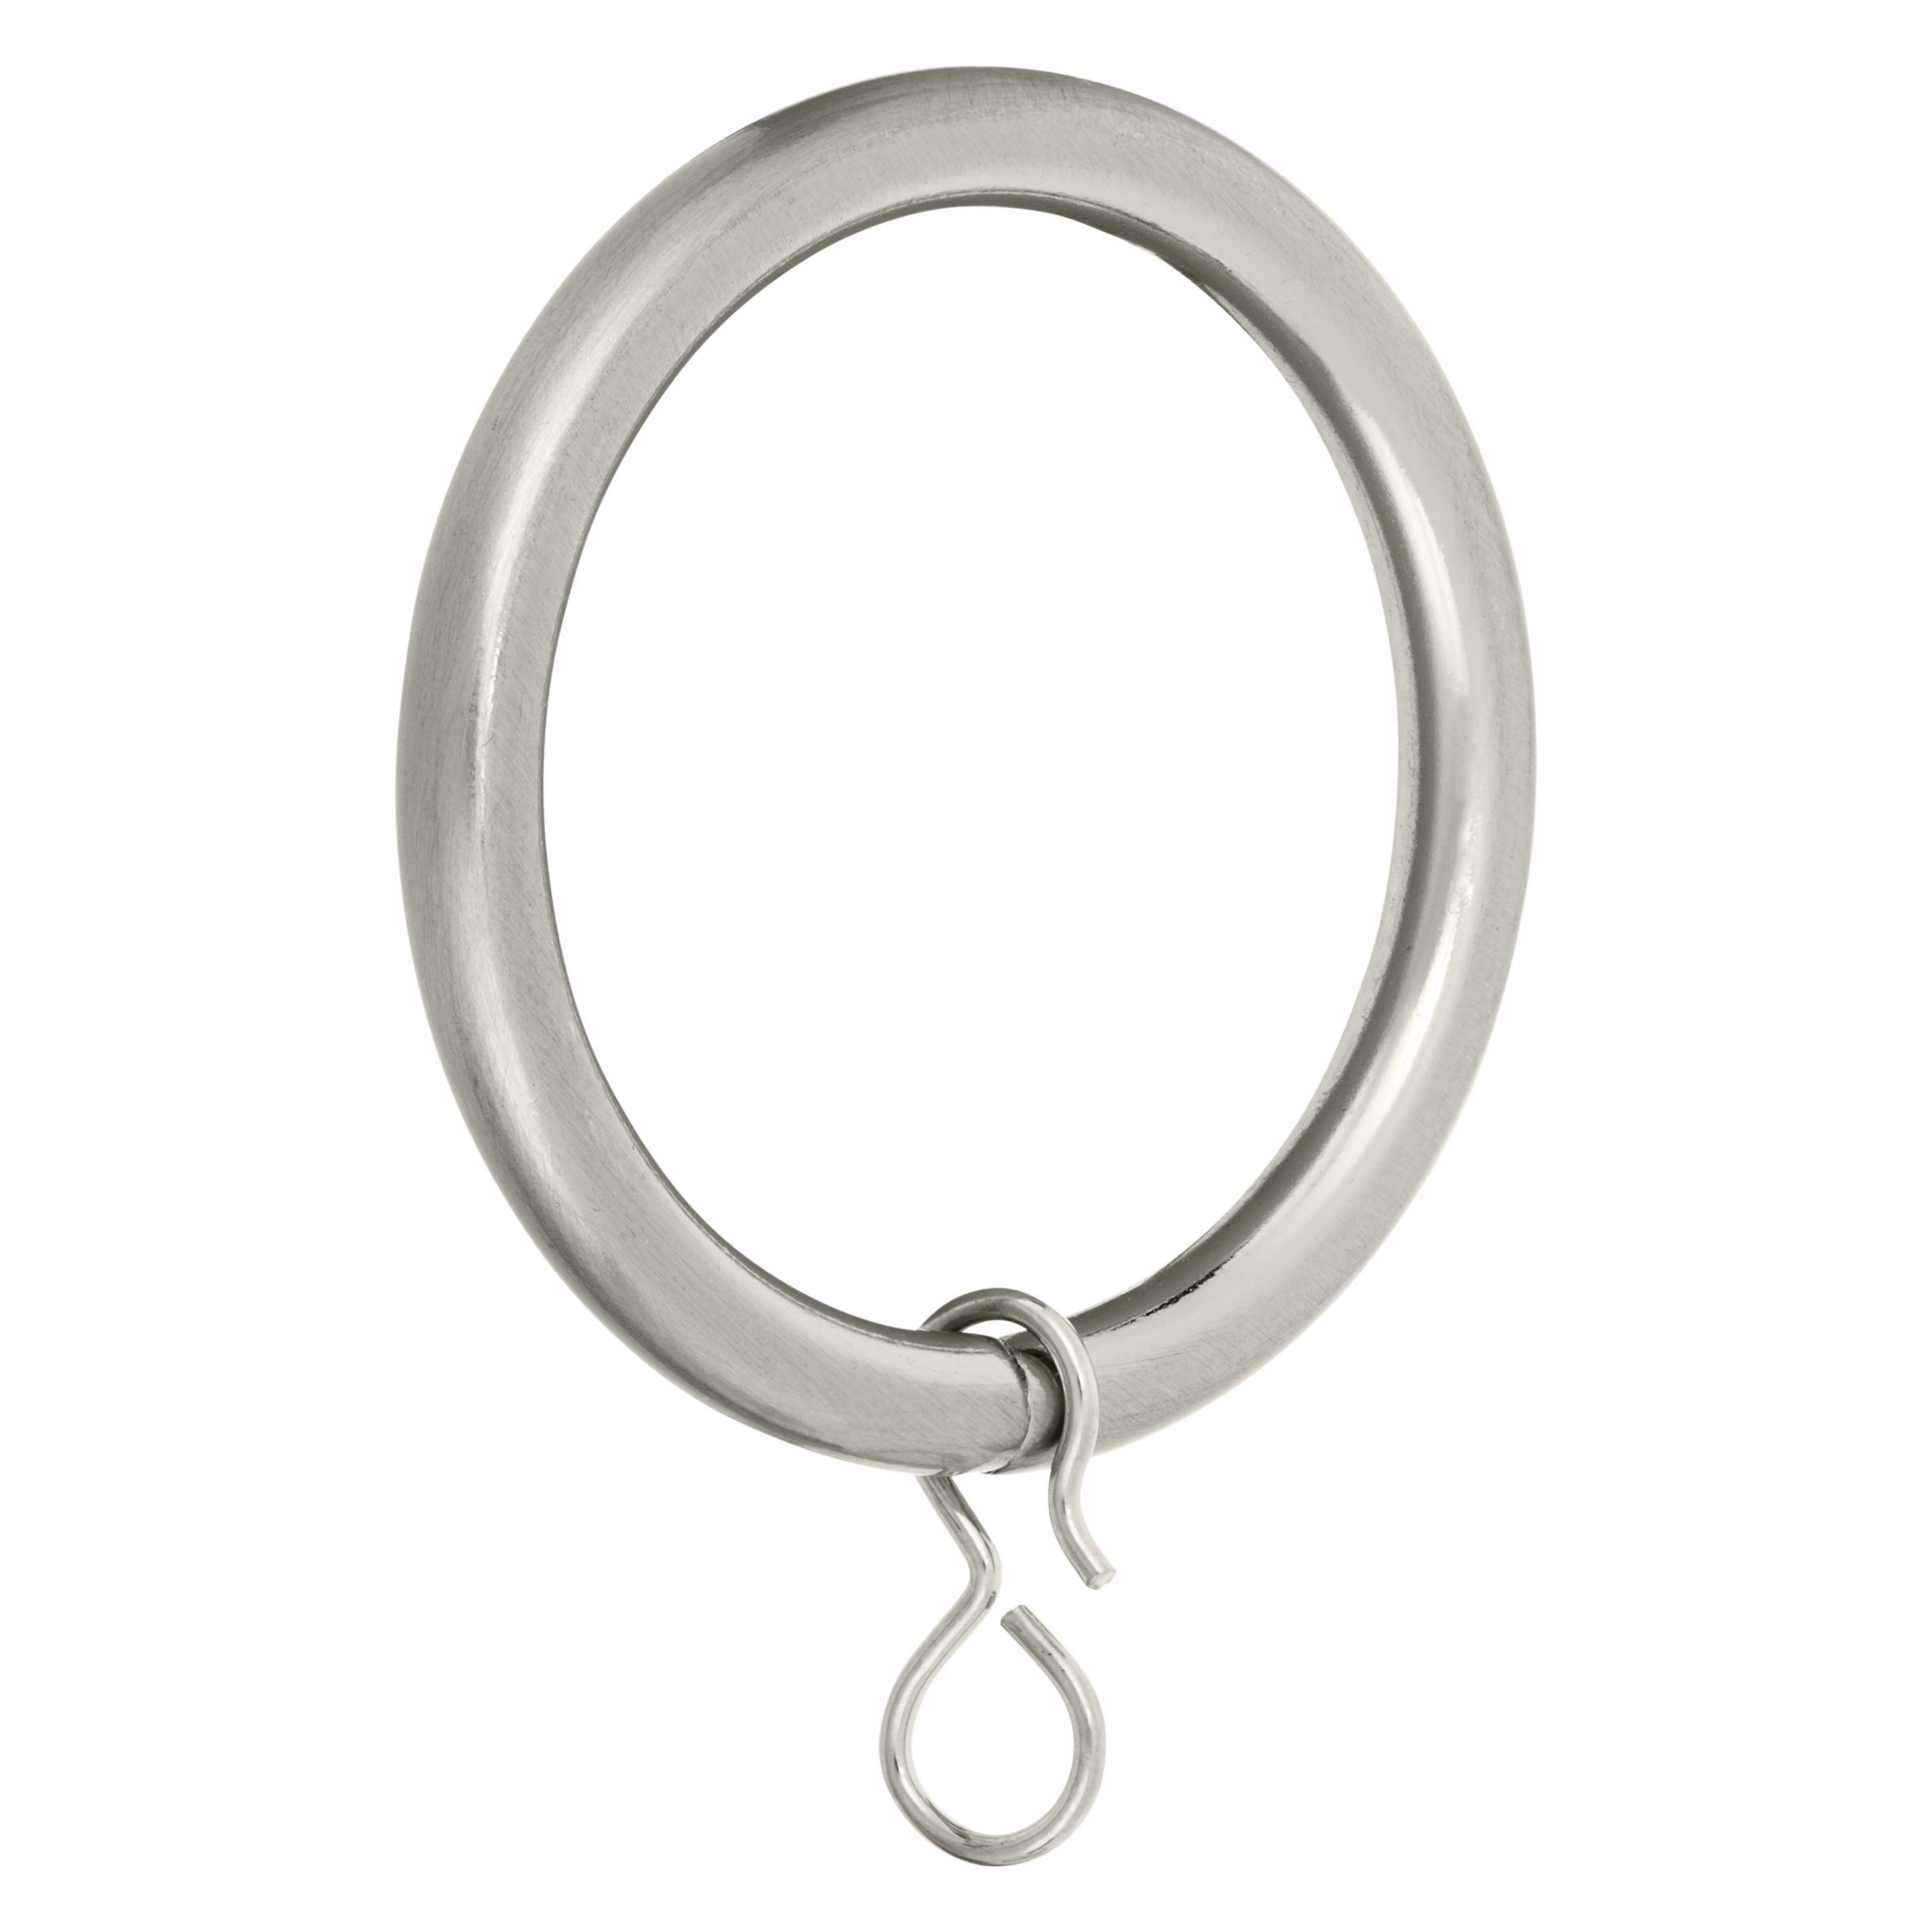 Nickel Plated Curtain Rings, Pack of